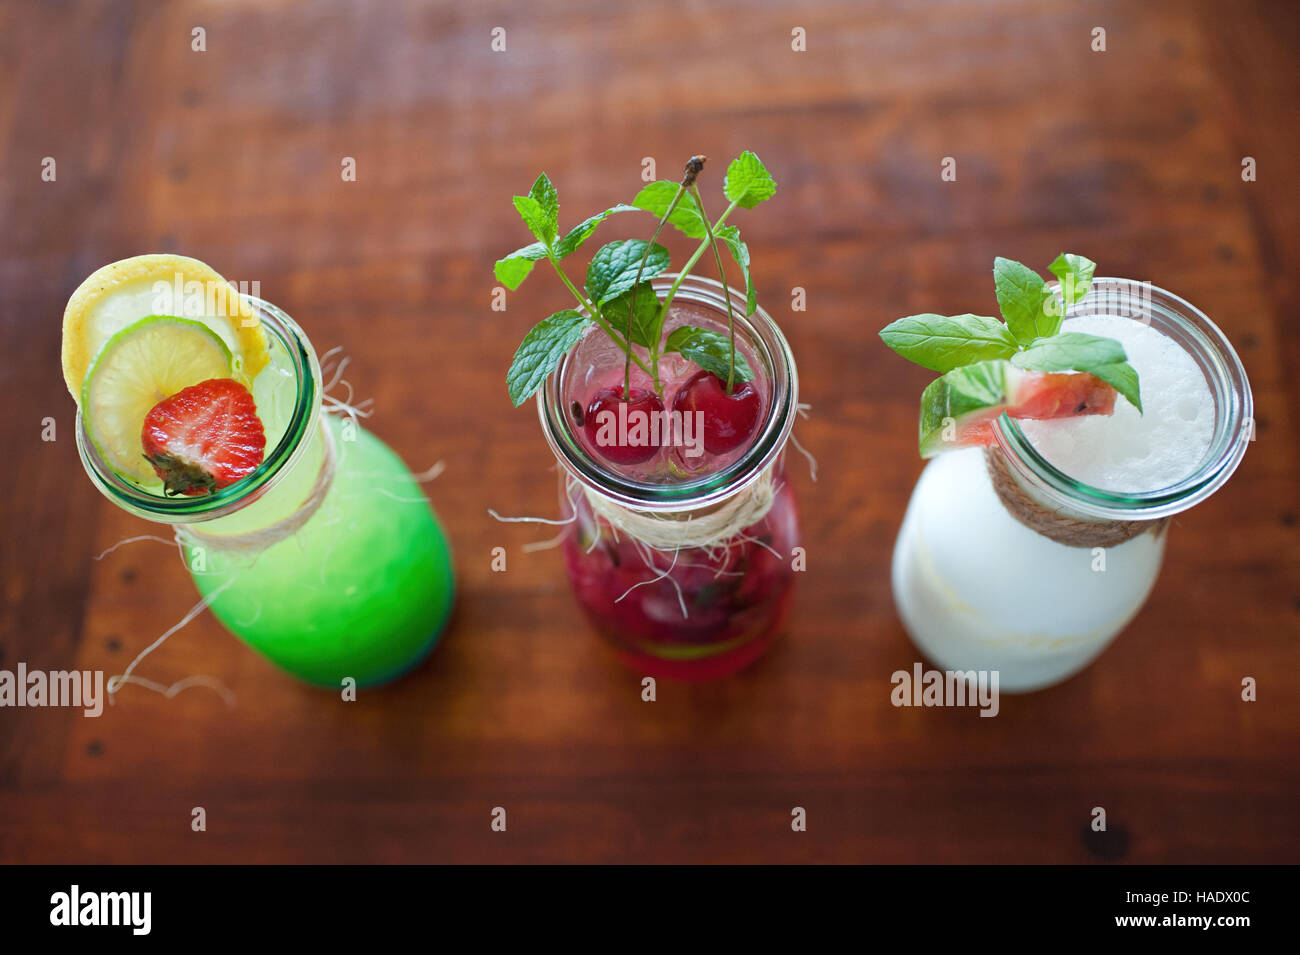 Colorful drinks and beverages on the table. Stock Photo